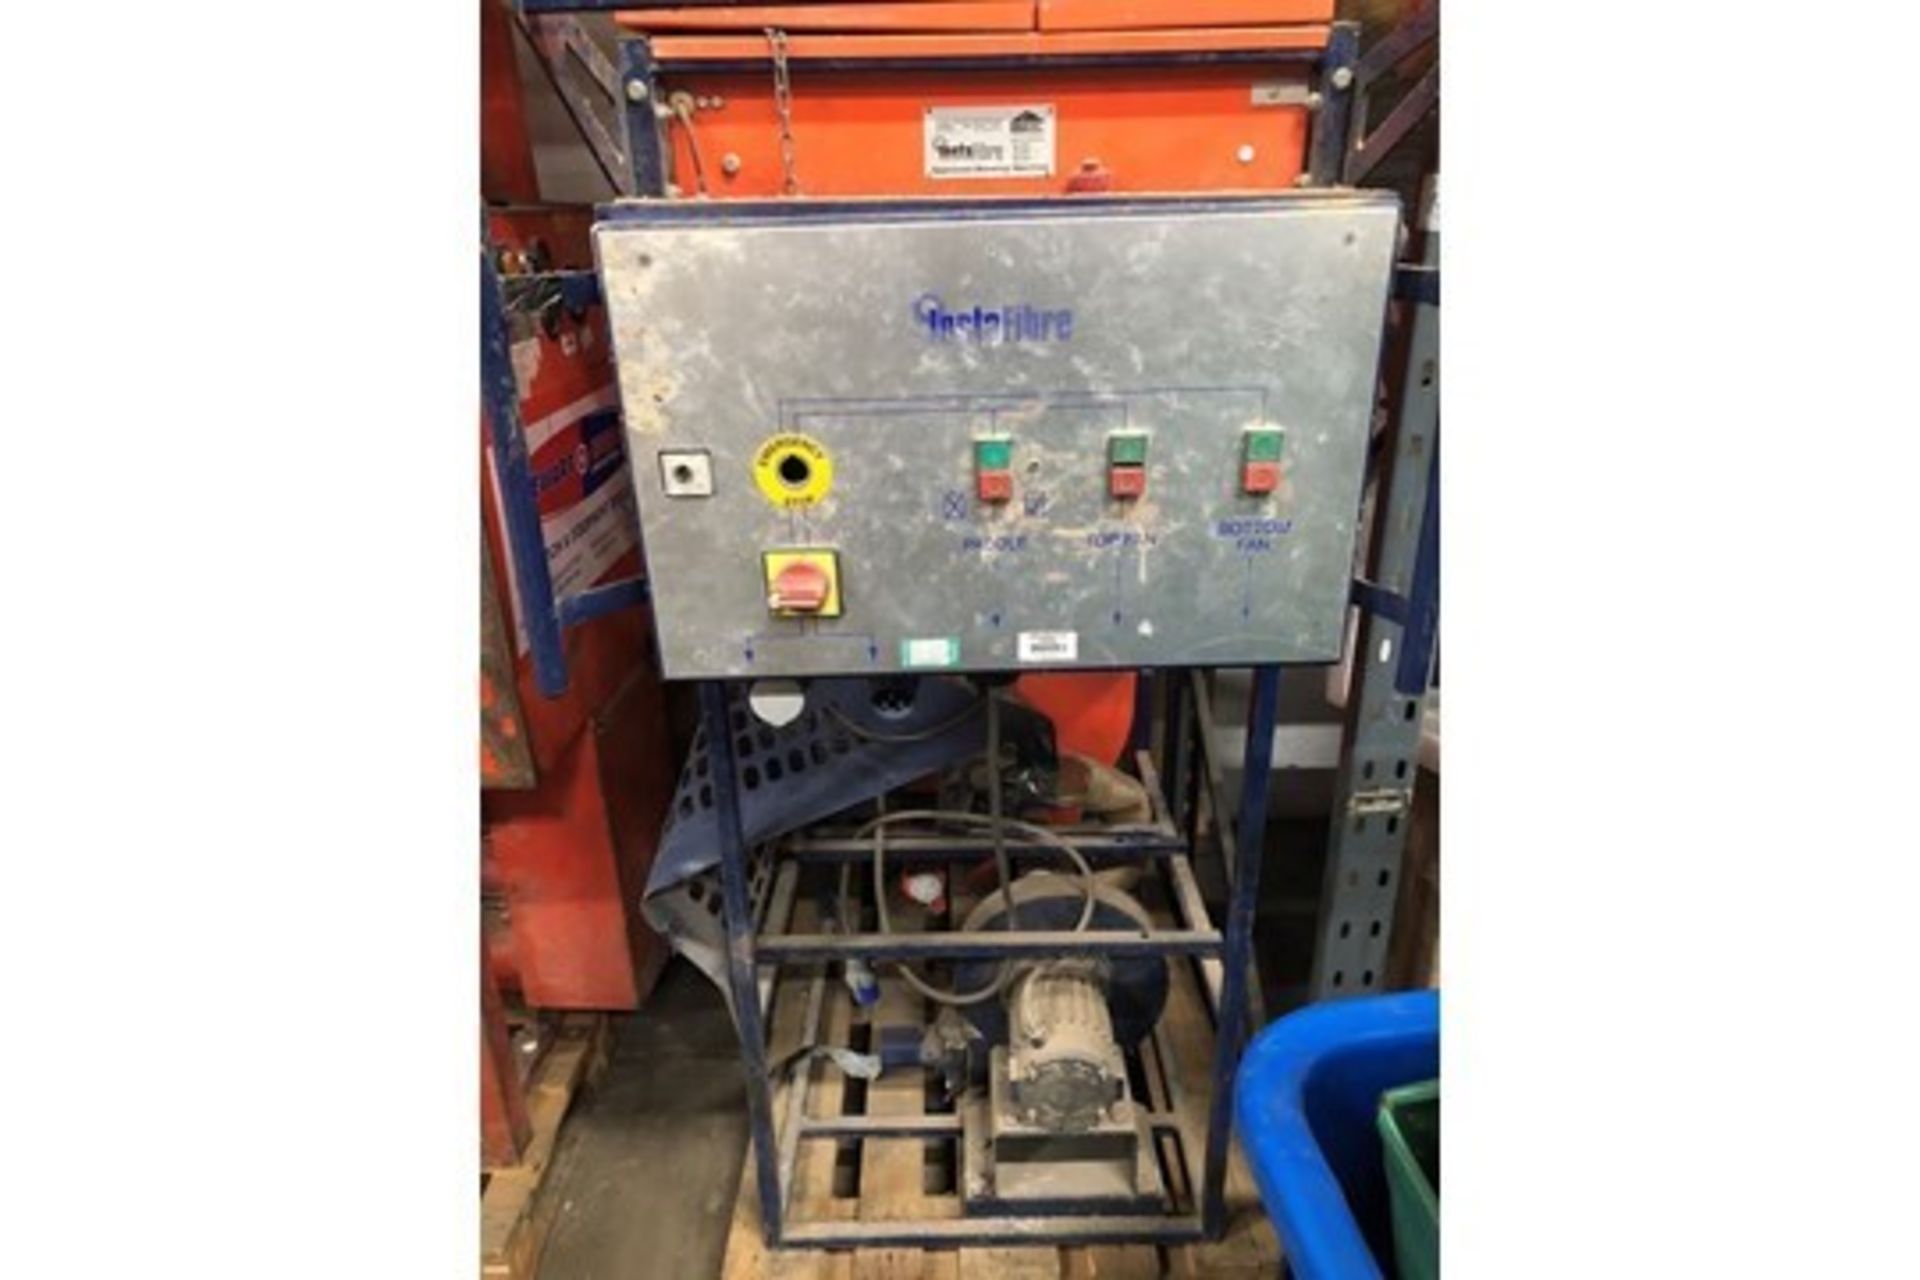 Instafibre Cavity Wall & Roof Insulation Blower Machine - Spares & Repairs - Image 2 of 4